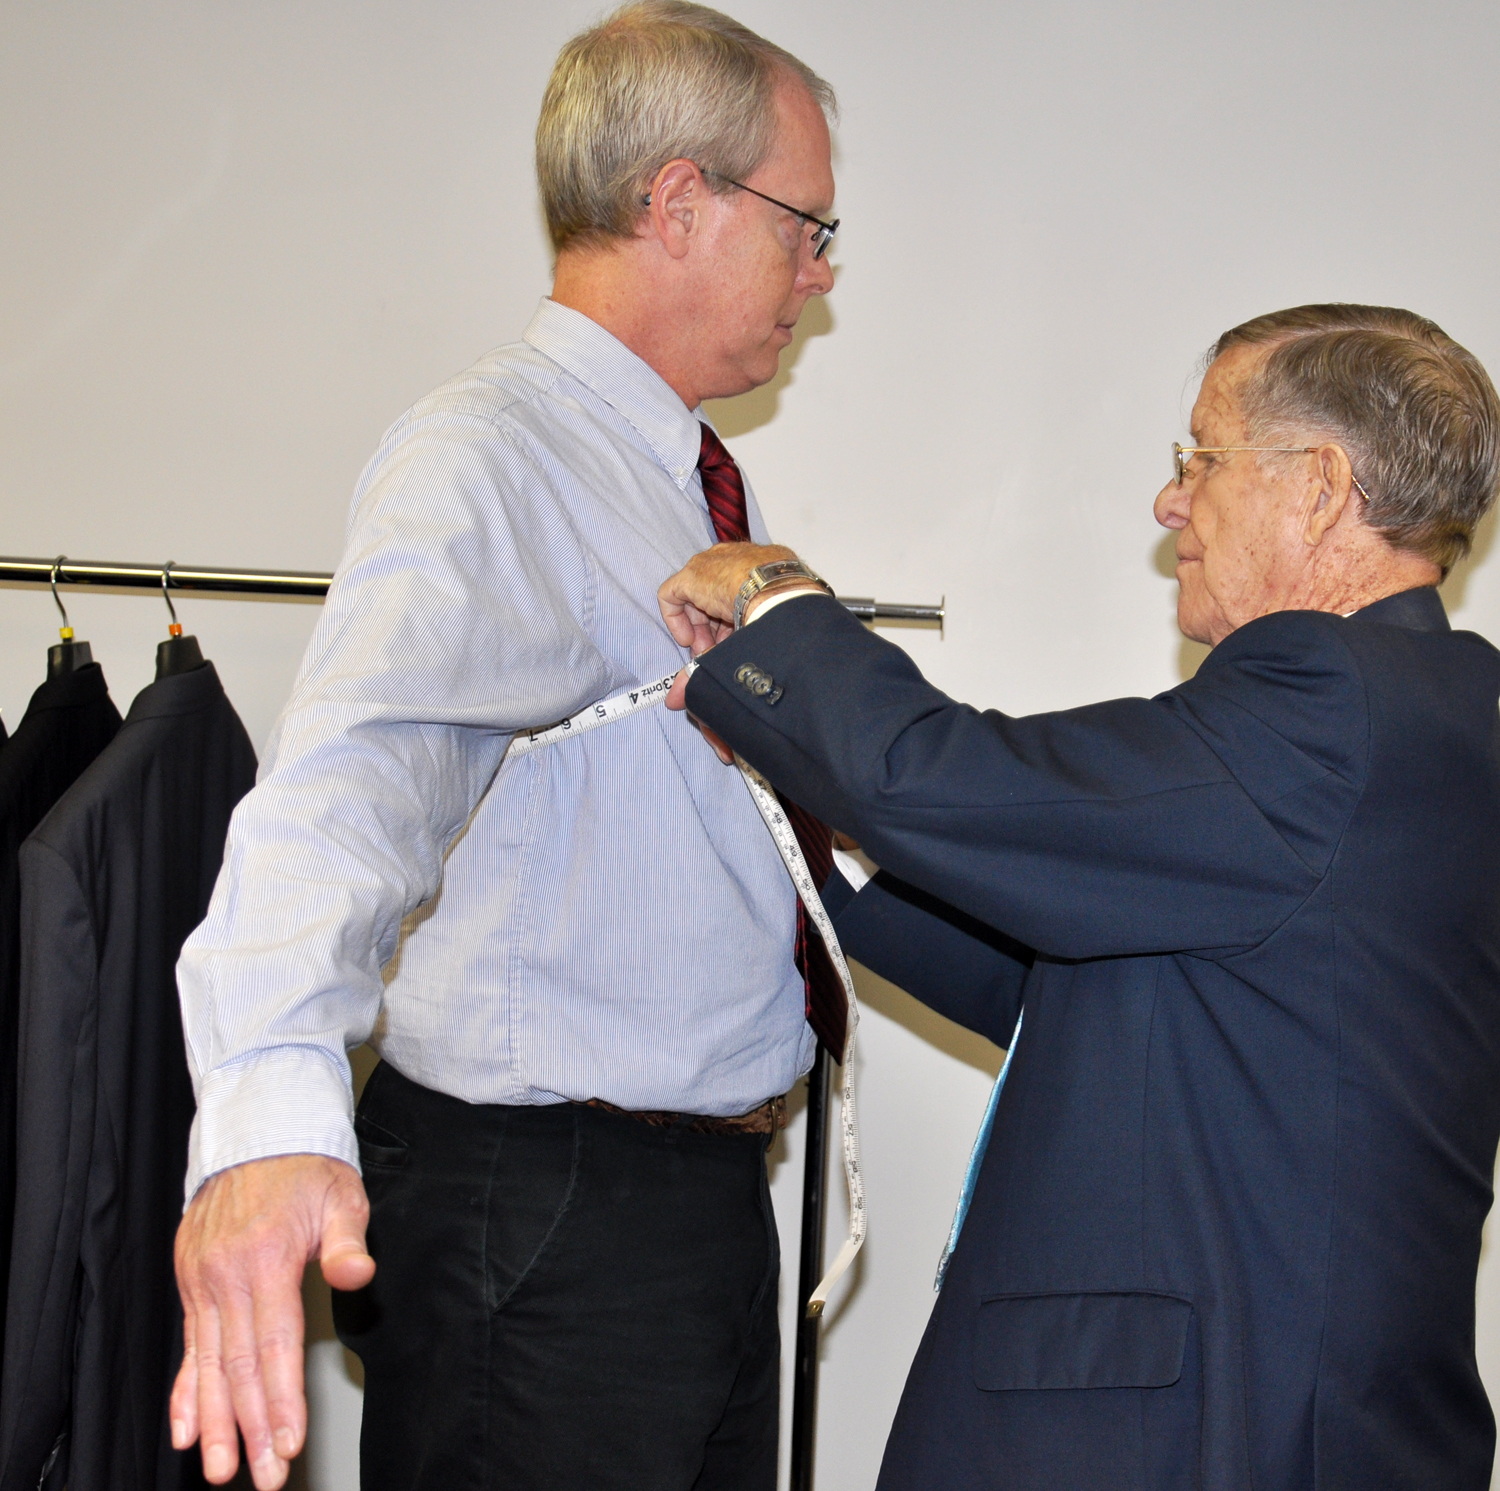 Jim Tatum with "Suits for Servants," right, fits Dr. Chris Conver, recruitment counselor and adjunct faculty member at Campbellsville University-Louisville, for a suit. (Campbellsville University Photo by Bayarmagnai "Max" Nergui)